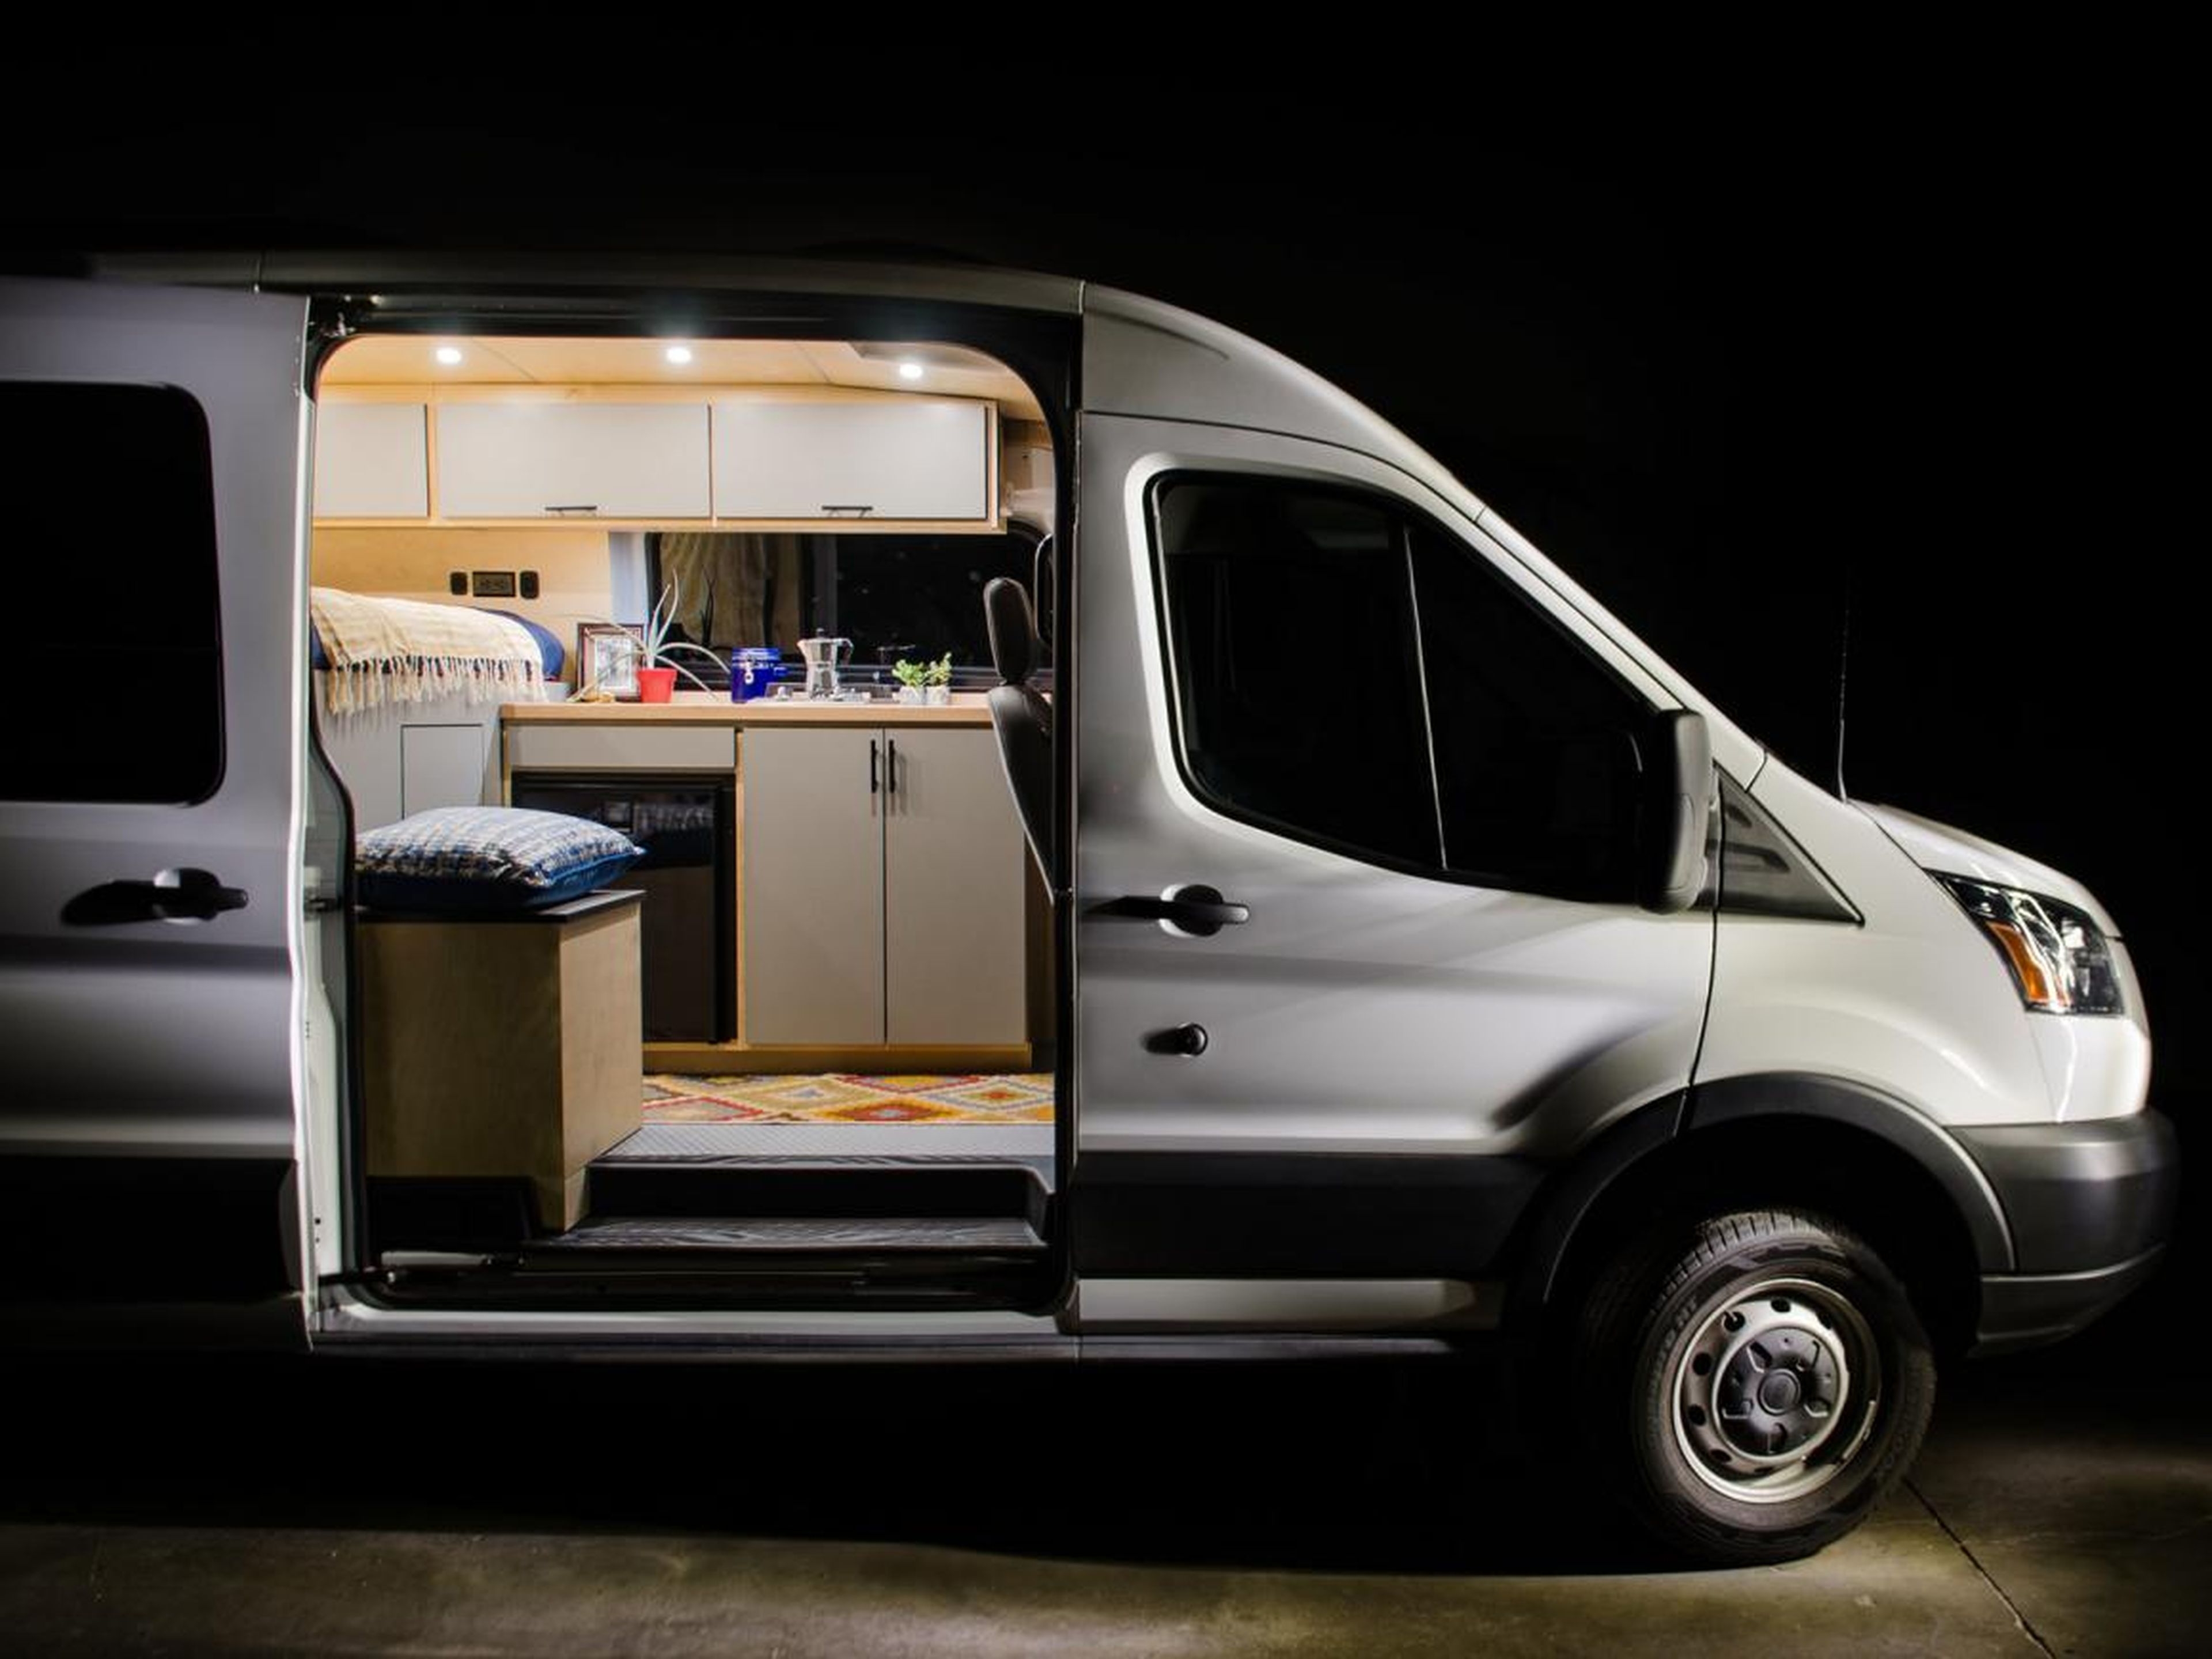 This custom tiny home on wheels was made from a Ford Transit van